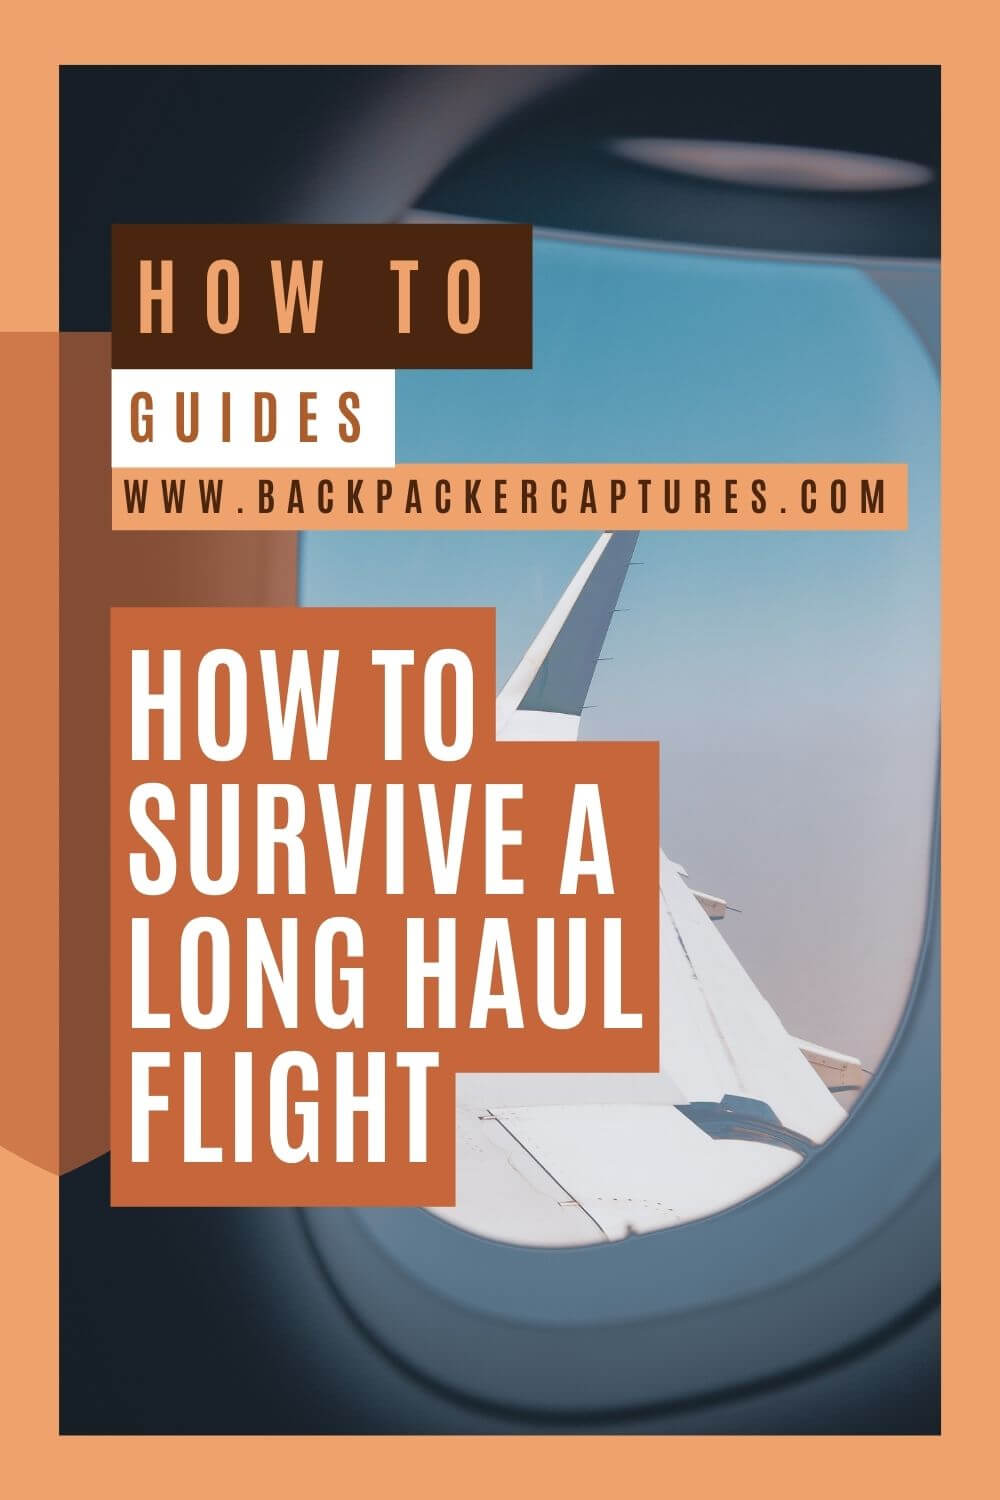 How to Survive a Long Haul Flight